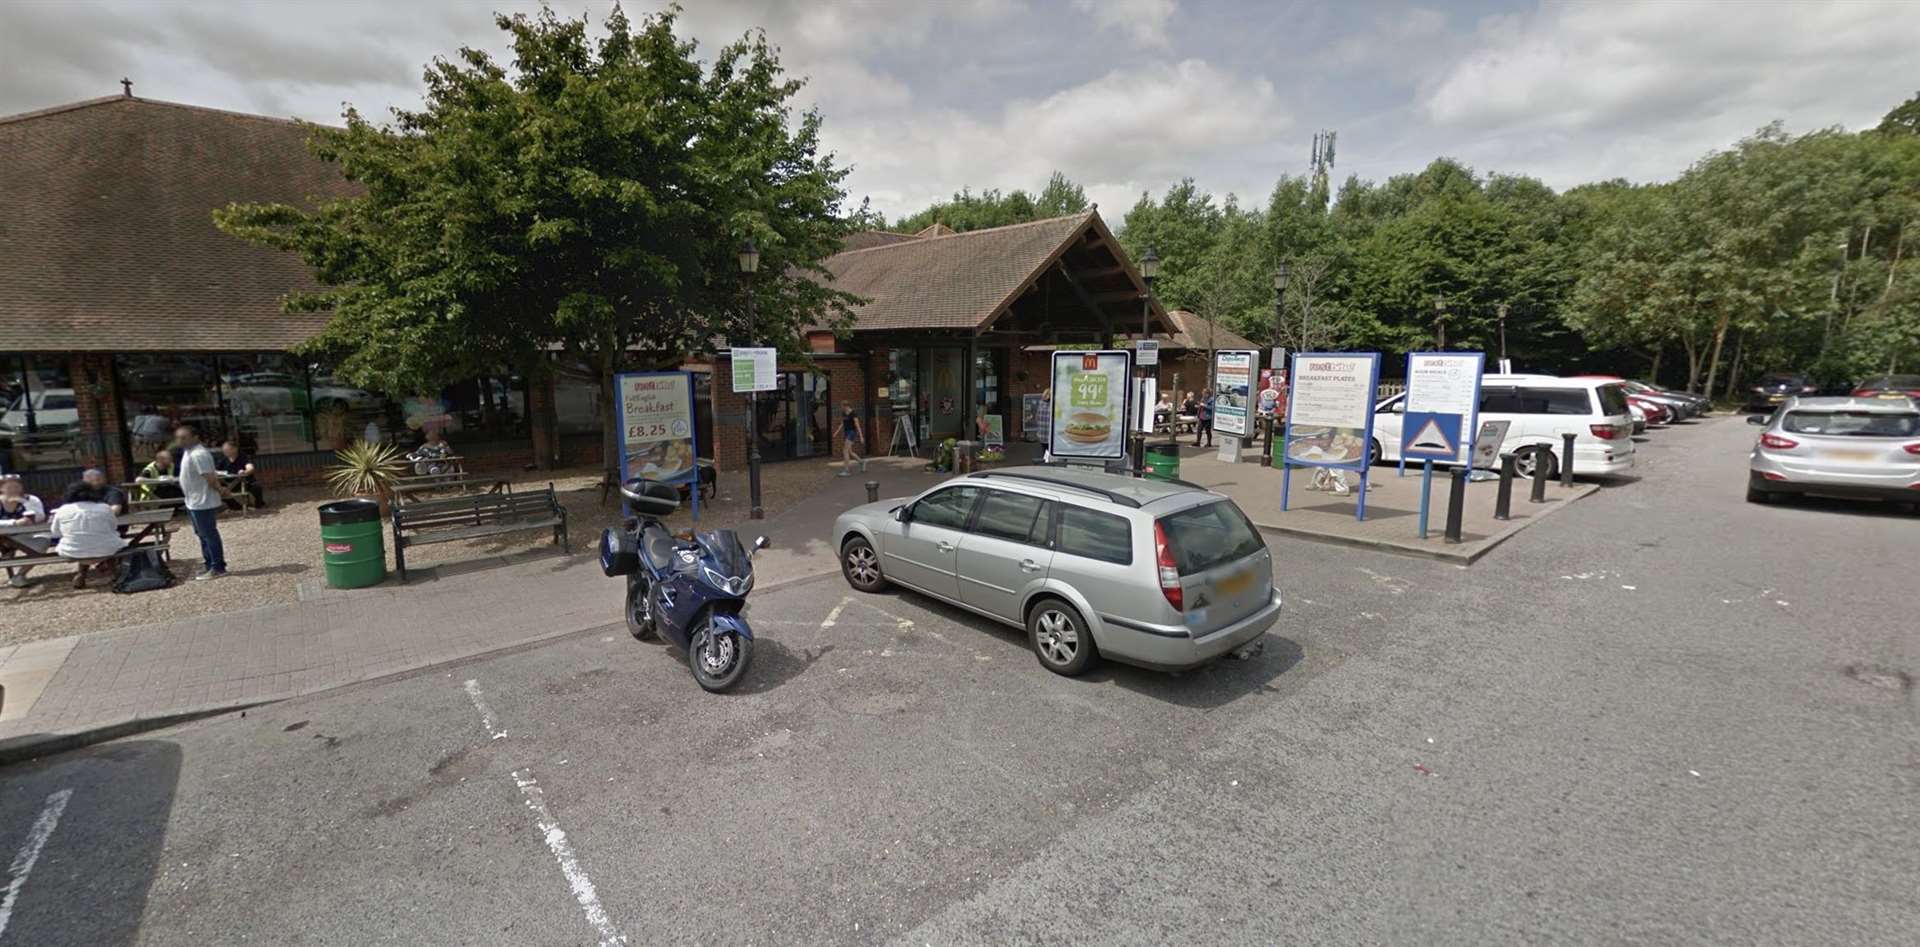 The new addition has opened at the Roadchef Maidstone Services on Junction 8 of the M20. Picture: Google